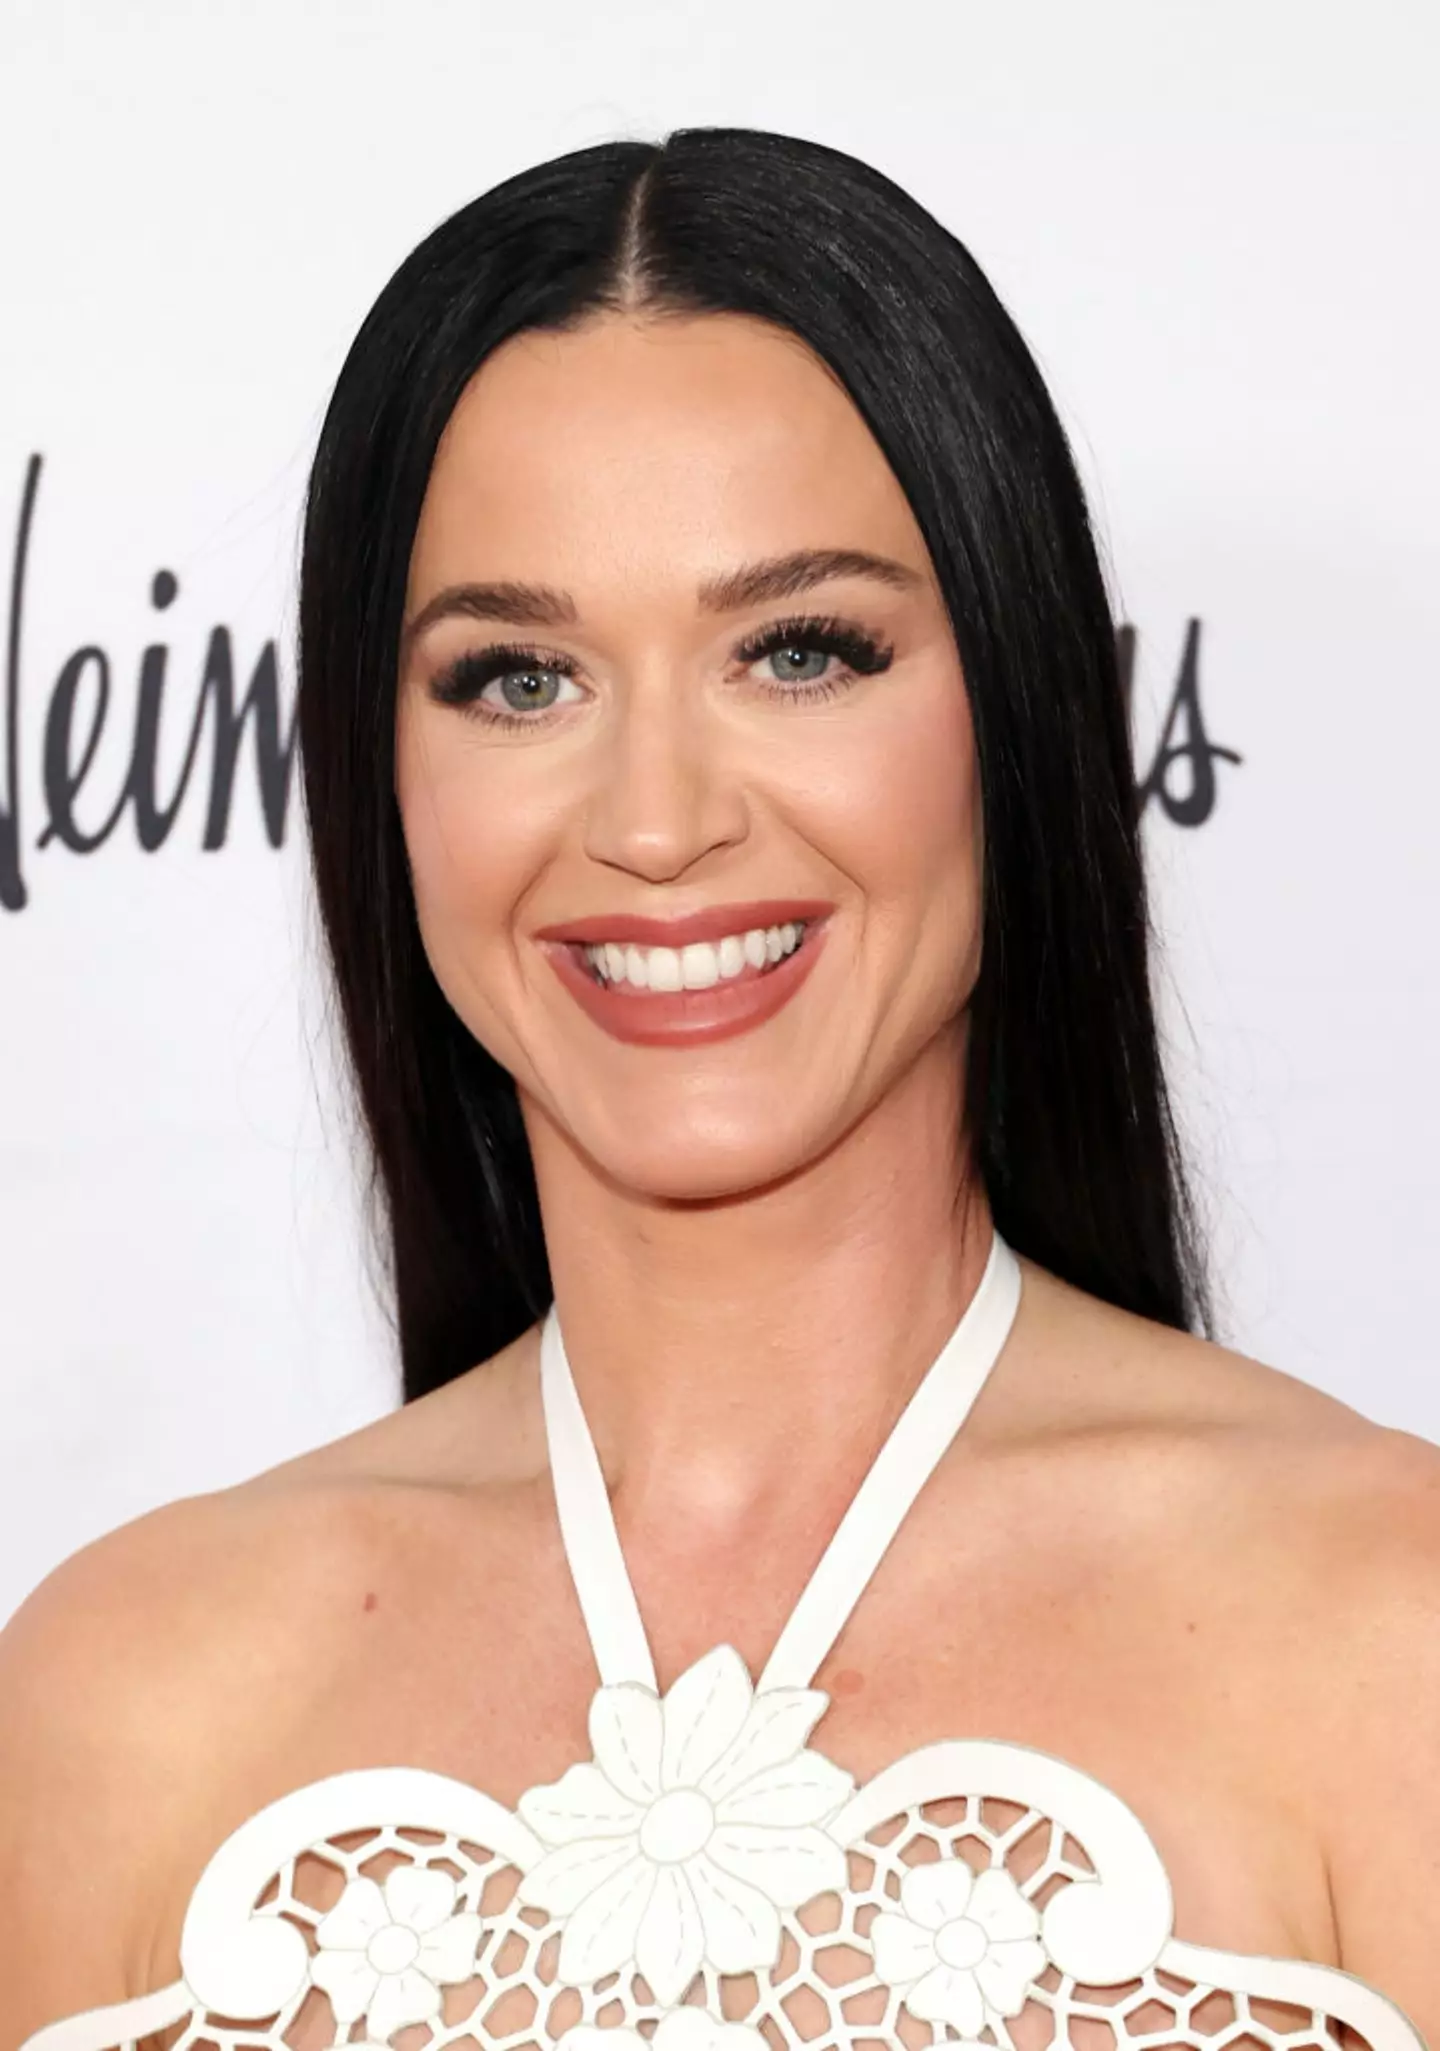 Katy Perry's daughter once called her mum by her stage name. (Monica Schipper / Staff / Getty Images)